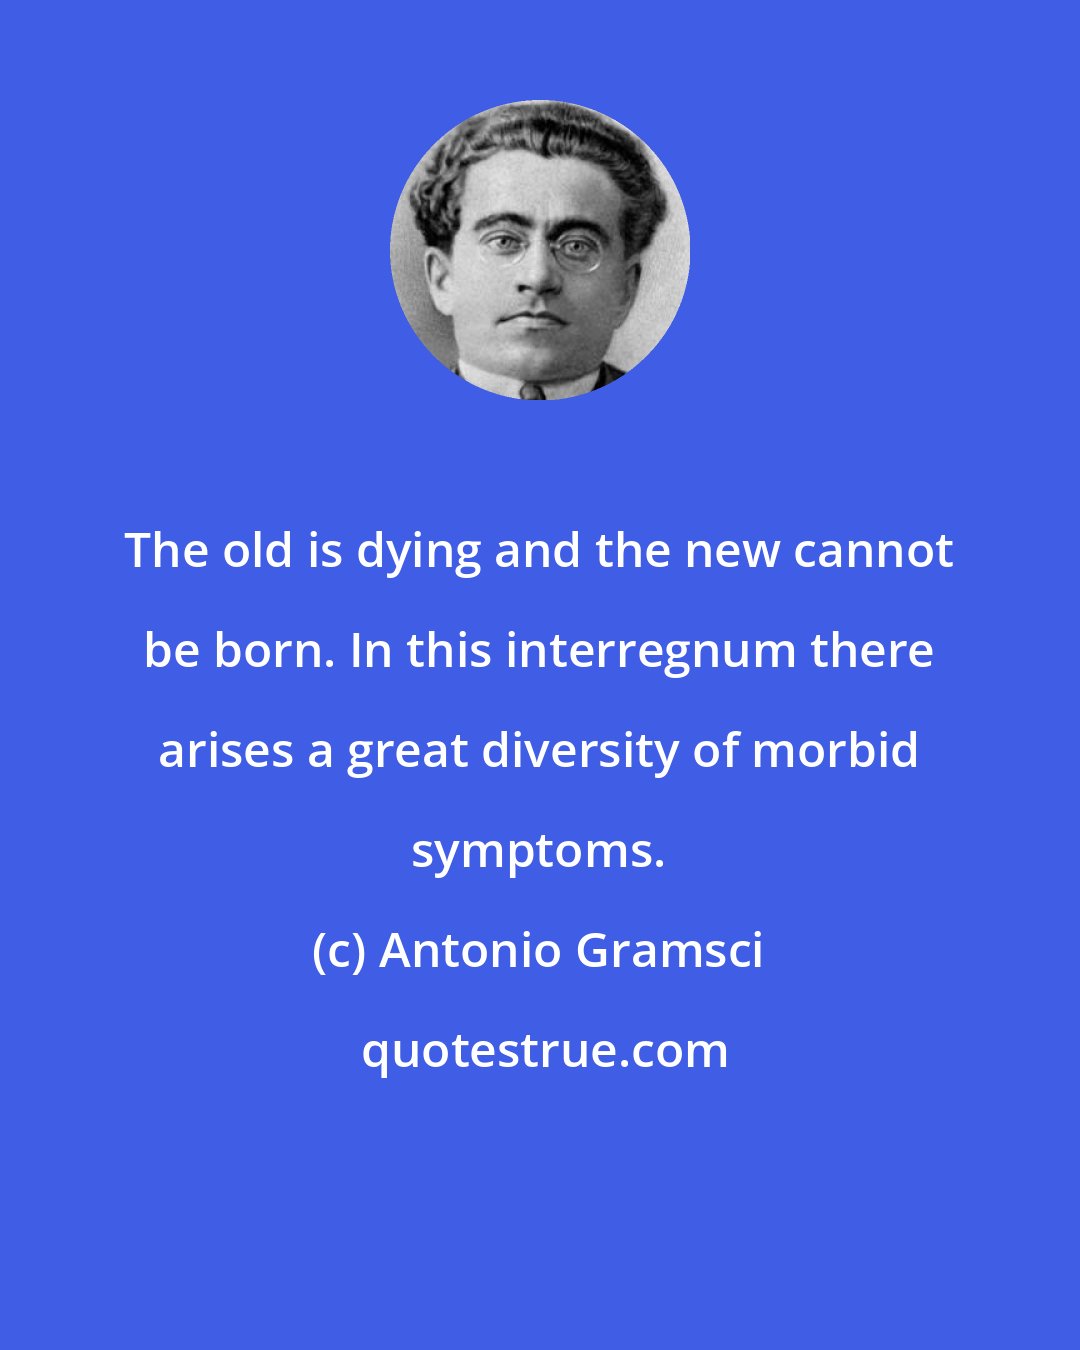 Antonio Gramsci: The old is dying and the new cannot be born. In this interregnum there arises a great diversity of morbid symptoms.